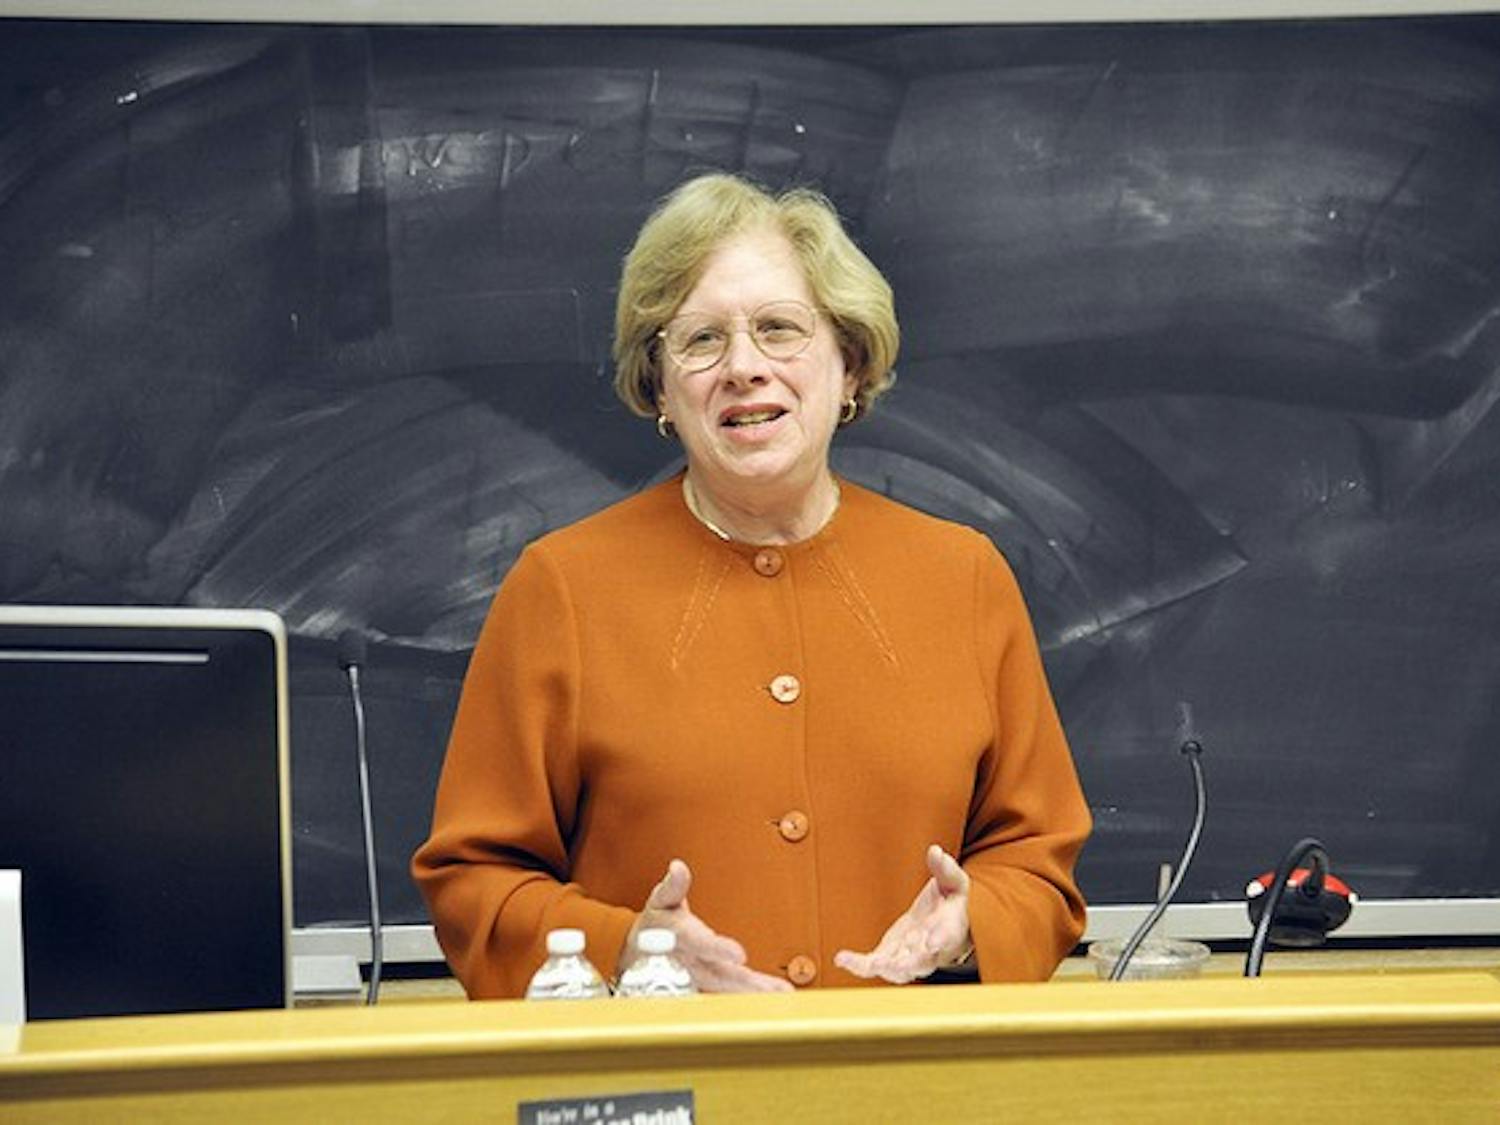 Nancy Malkiel, who served as the dean of the college at Princeton University for 24 years, related her accomplishments in undergraduate education on Tuesday.